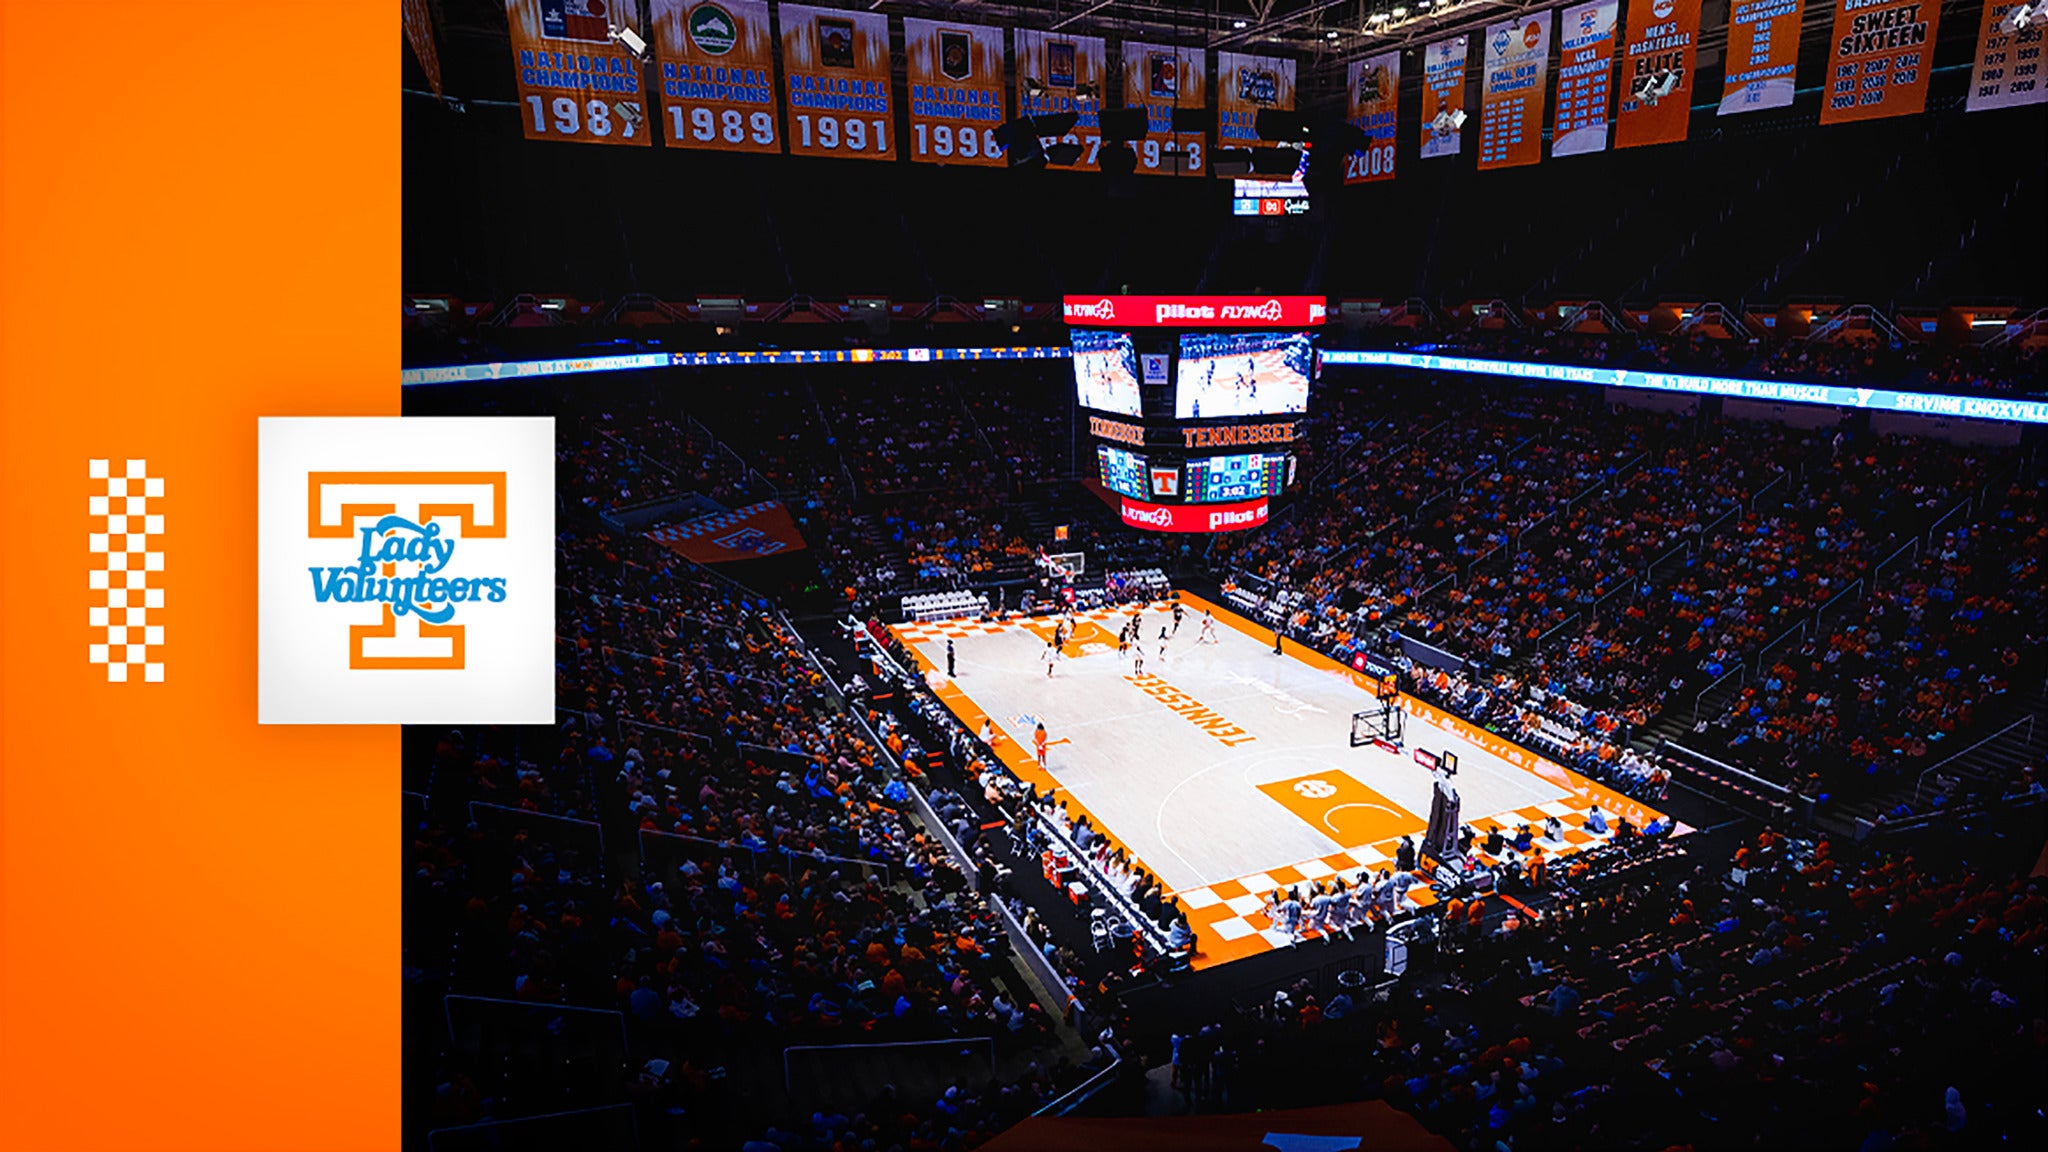 Tennessee Lady Volunteers Women's Basketball vs. Florida A&M Rattlers Womens Basketball in Knoxville promo photo for Shareholder & Top 100 presale offer code